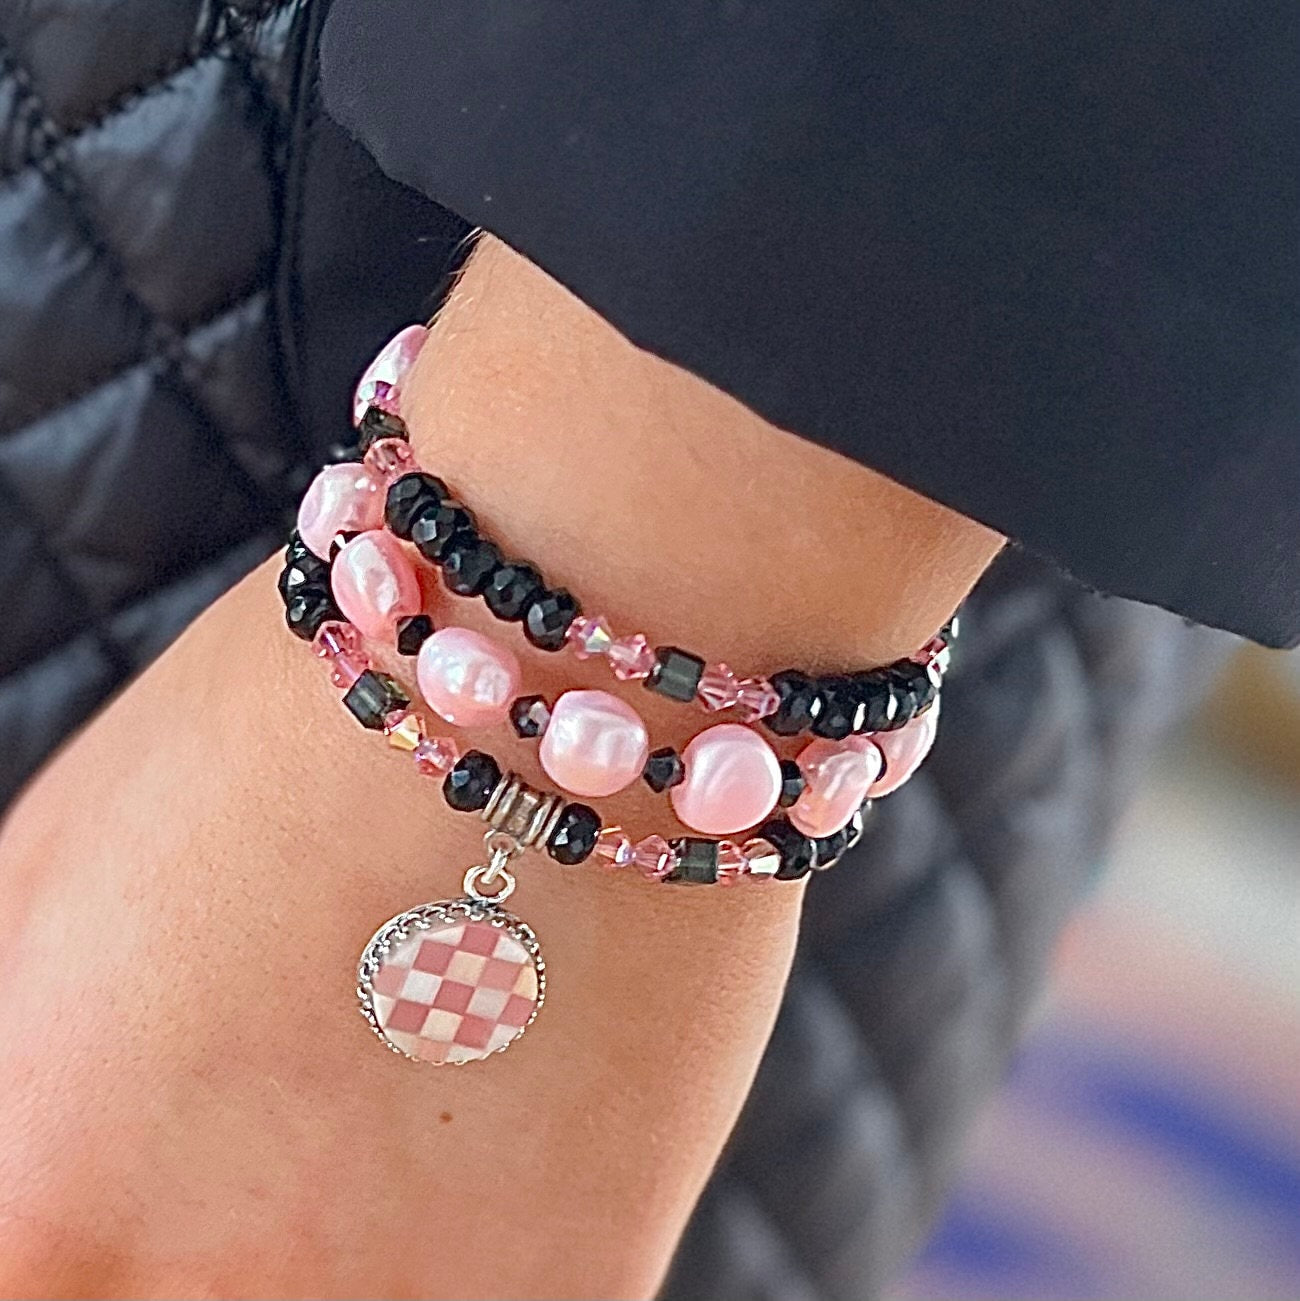 Pink Vintage Mother of Pearl Shell Bracelet, Black Onyx and Pink Pearl Jewelry, Unique Gift for Her, Coil Wrap Bracelet, Valentines Day GIft